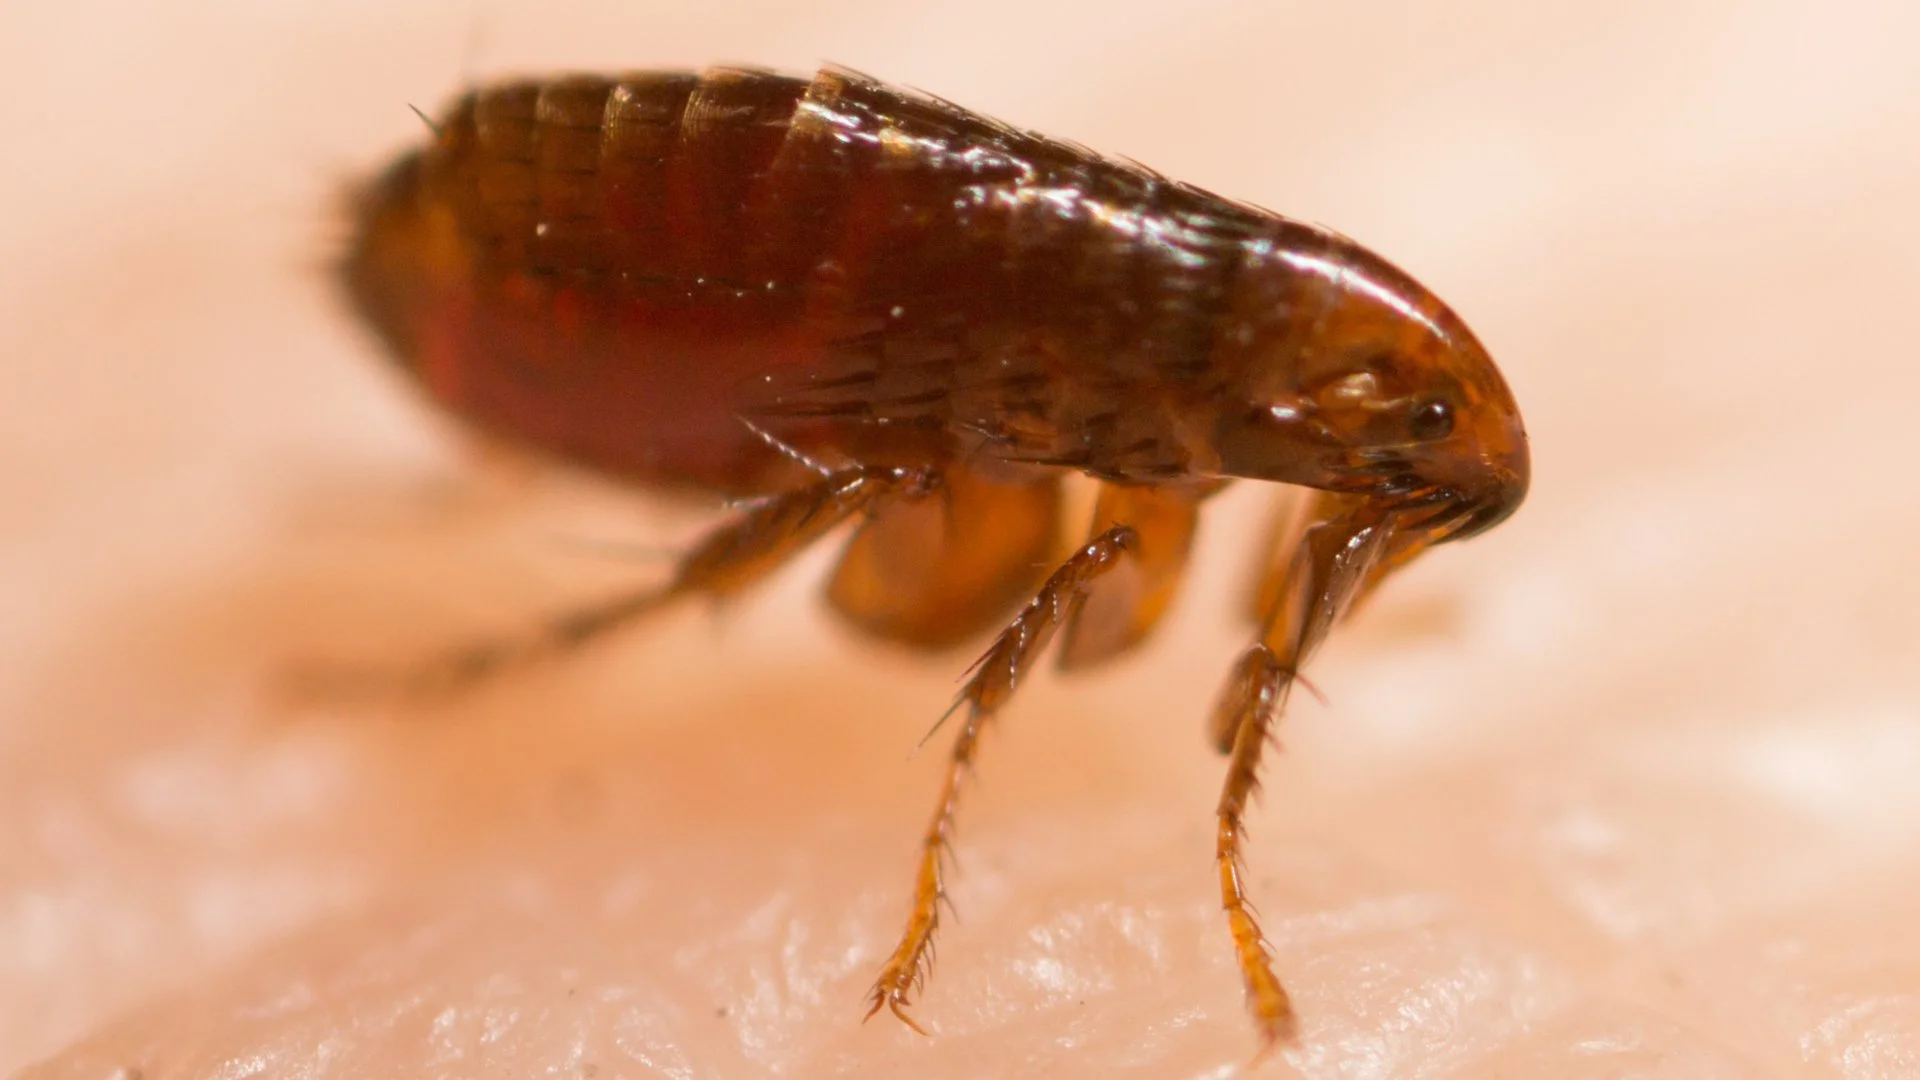 Uh Oh - Did You Discover a Flea Infestation? Do This!